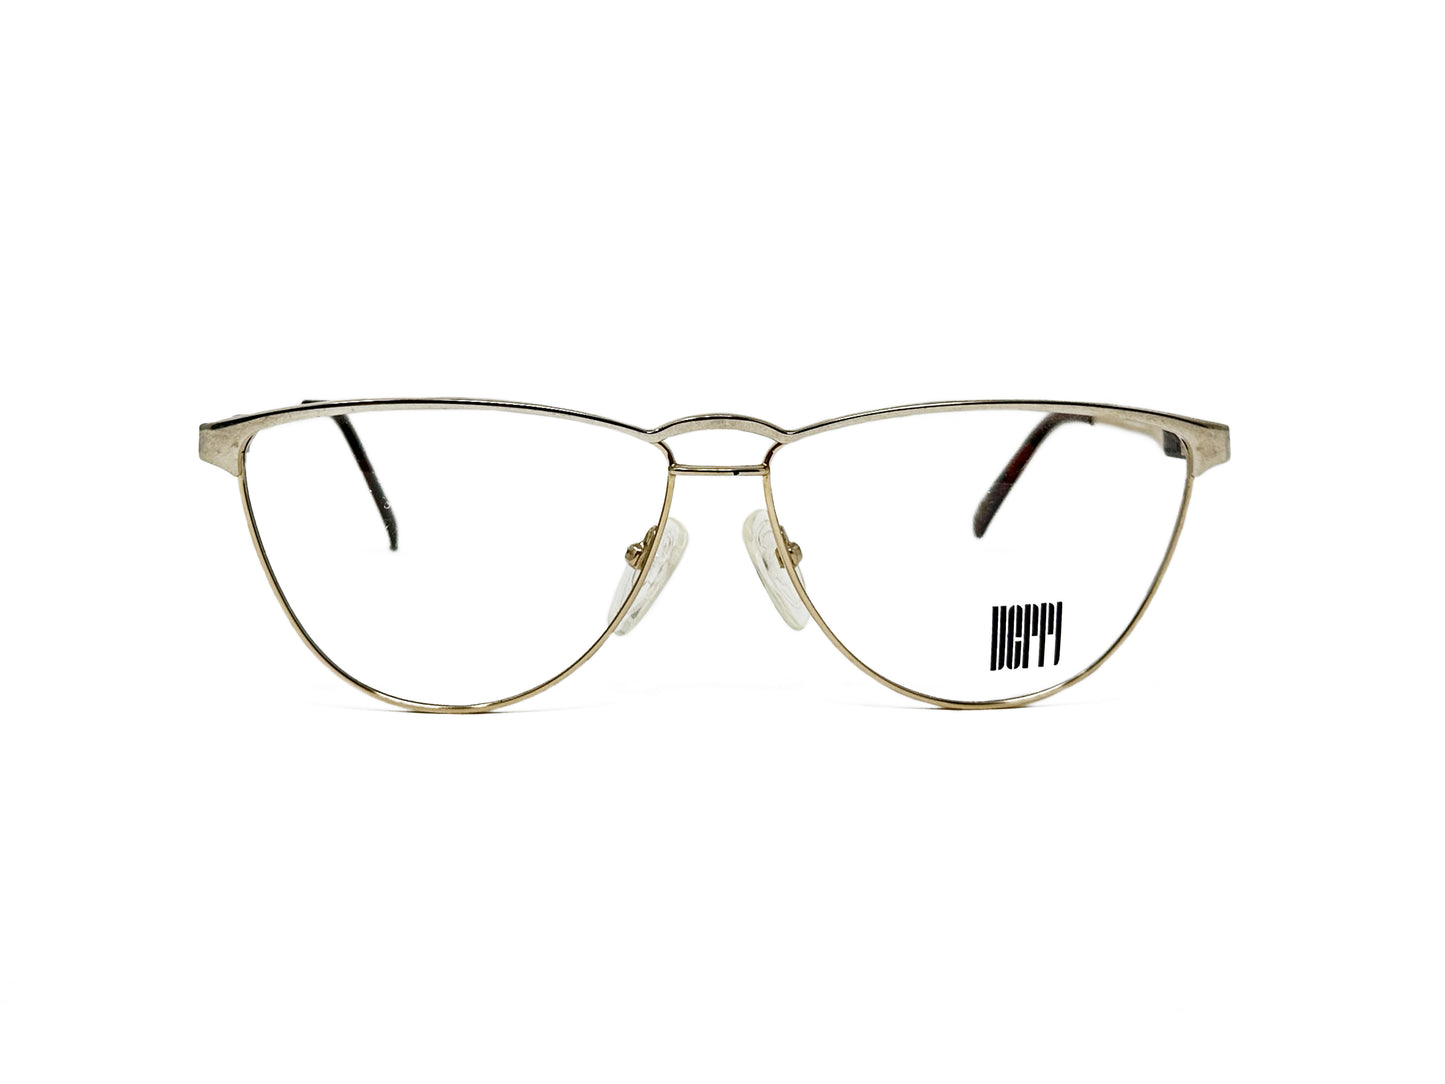 Derri rounded-triangular, metal, optical frame. Model: 9702. Color: G-W - White gold. Front view. 